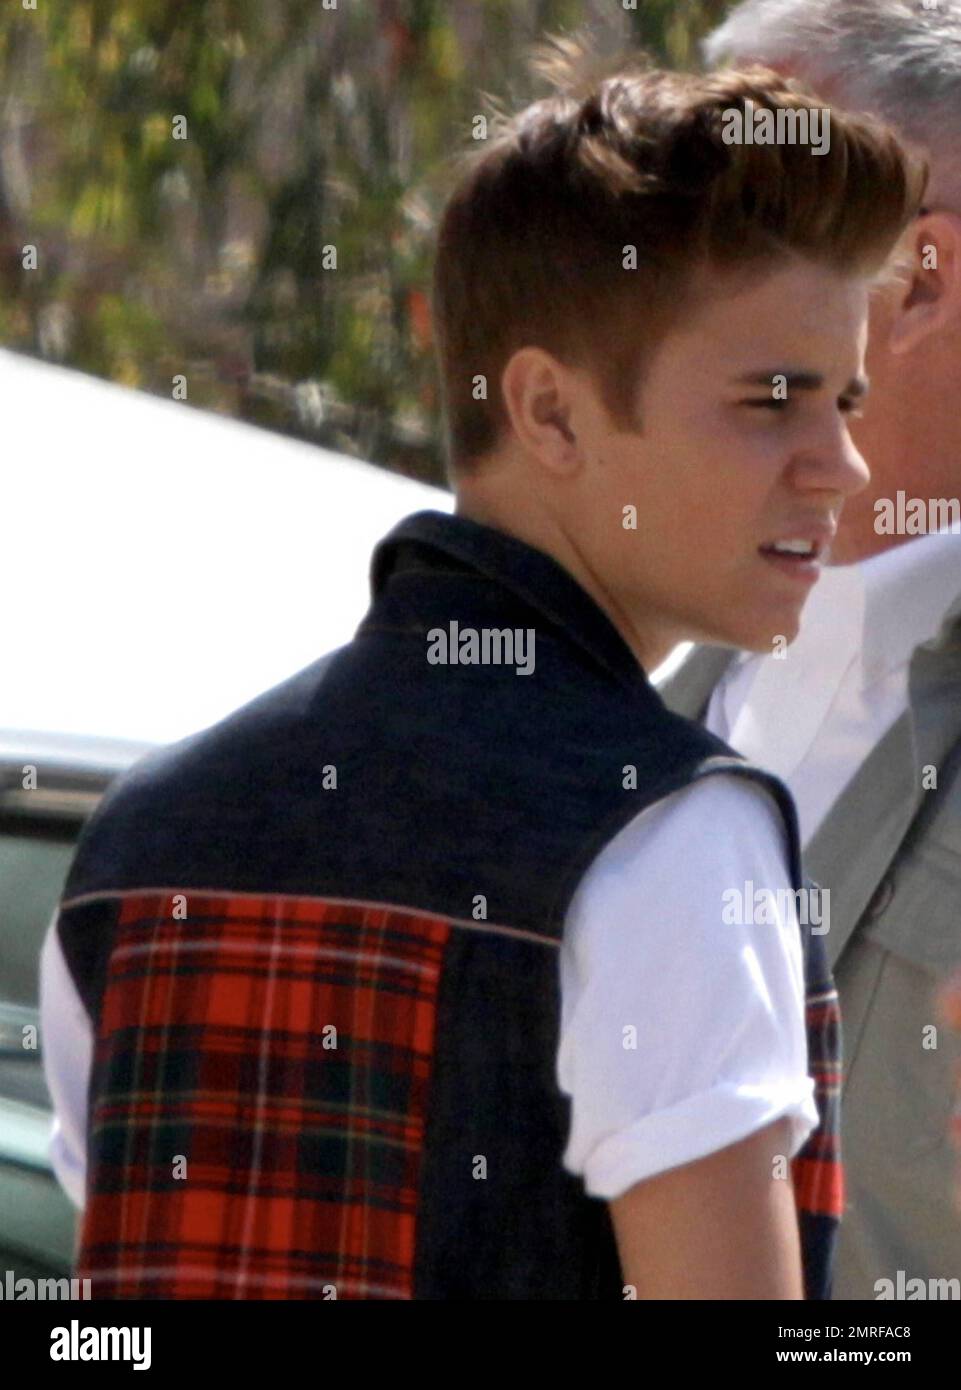 Justin Bieber goes Rockabilly style for scenes in his new music